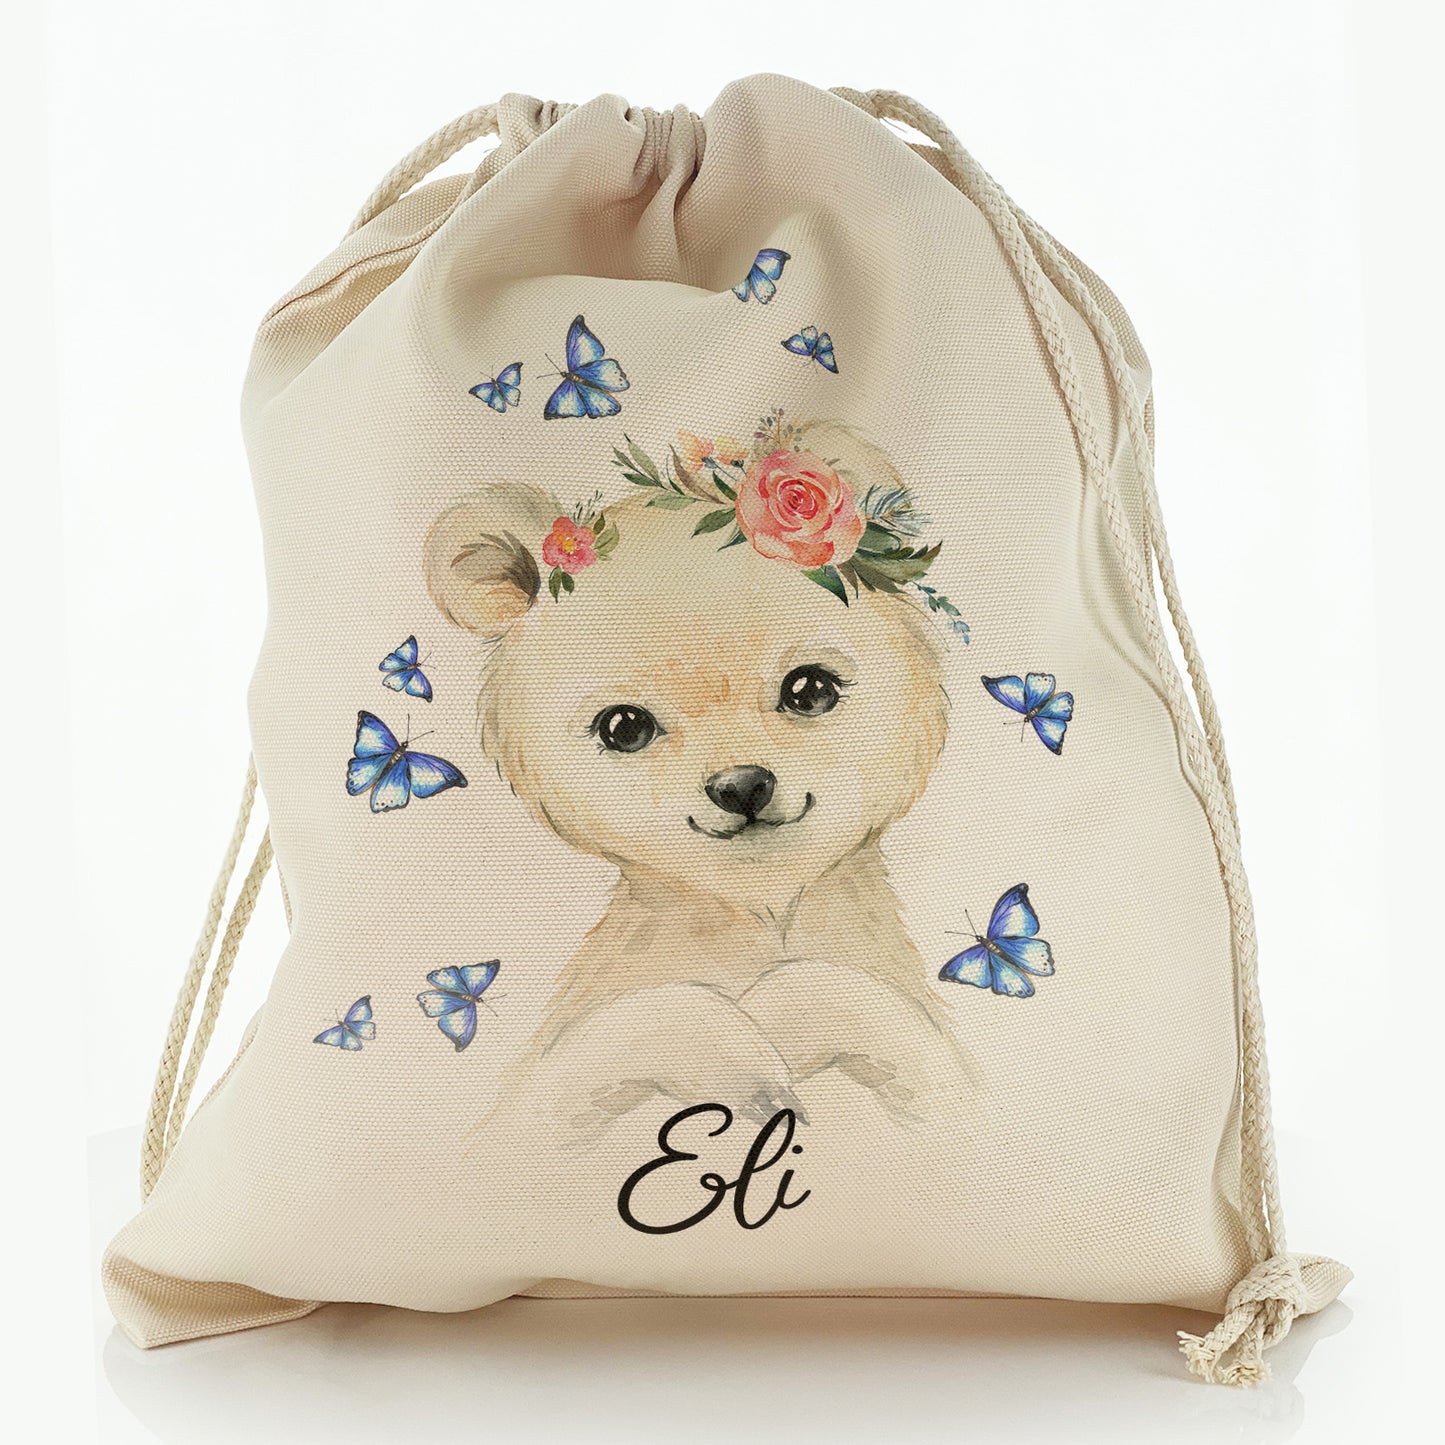 Personalised Canvas Sack with White Polar Bear Blue Butterflies and Cute Text